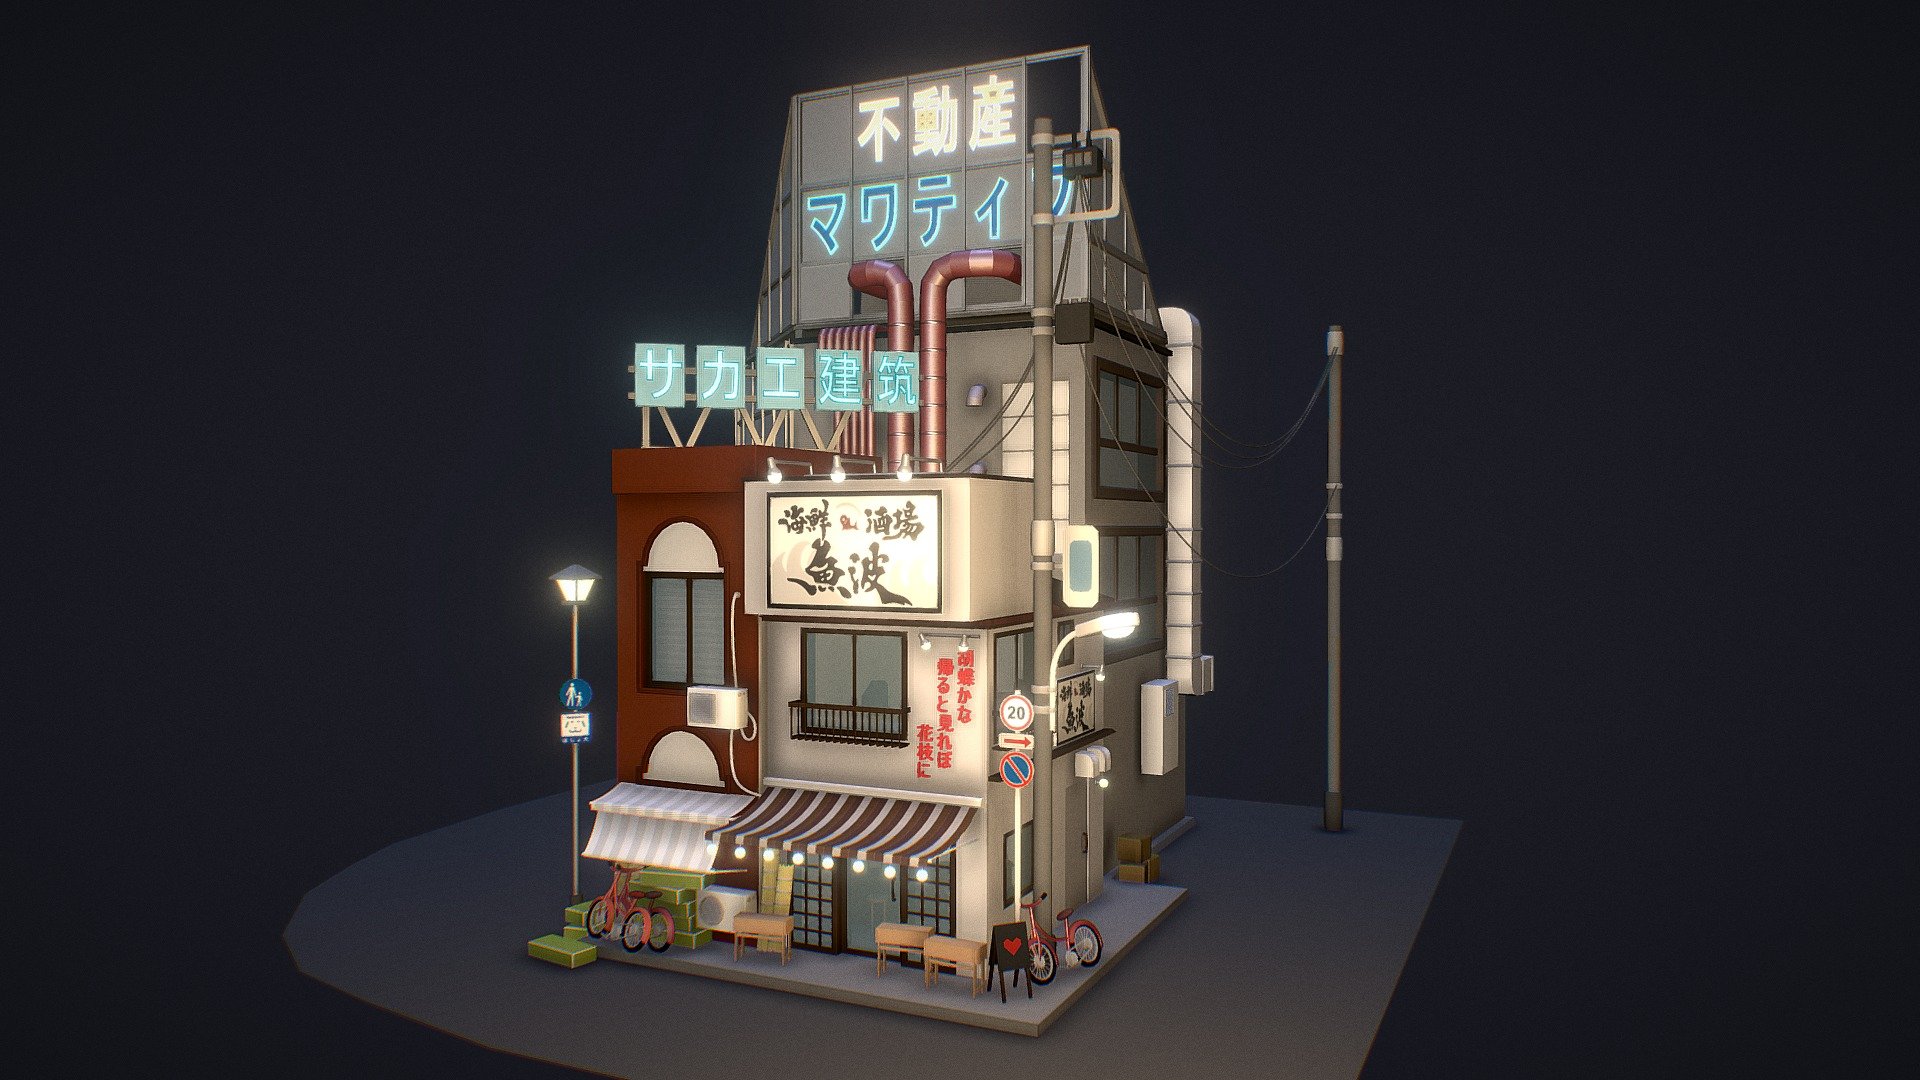 Music: Nujabes - Aruarian dance - Japanese house 2.0 - Download Free 3D model by annzep 3d model